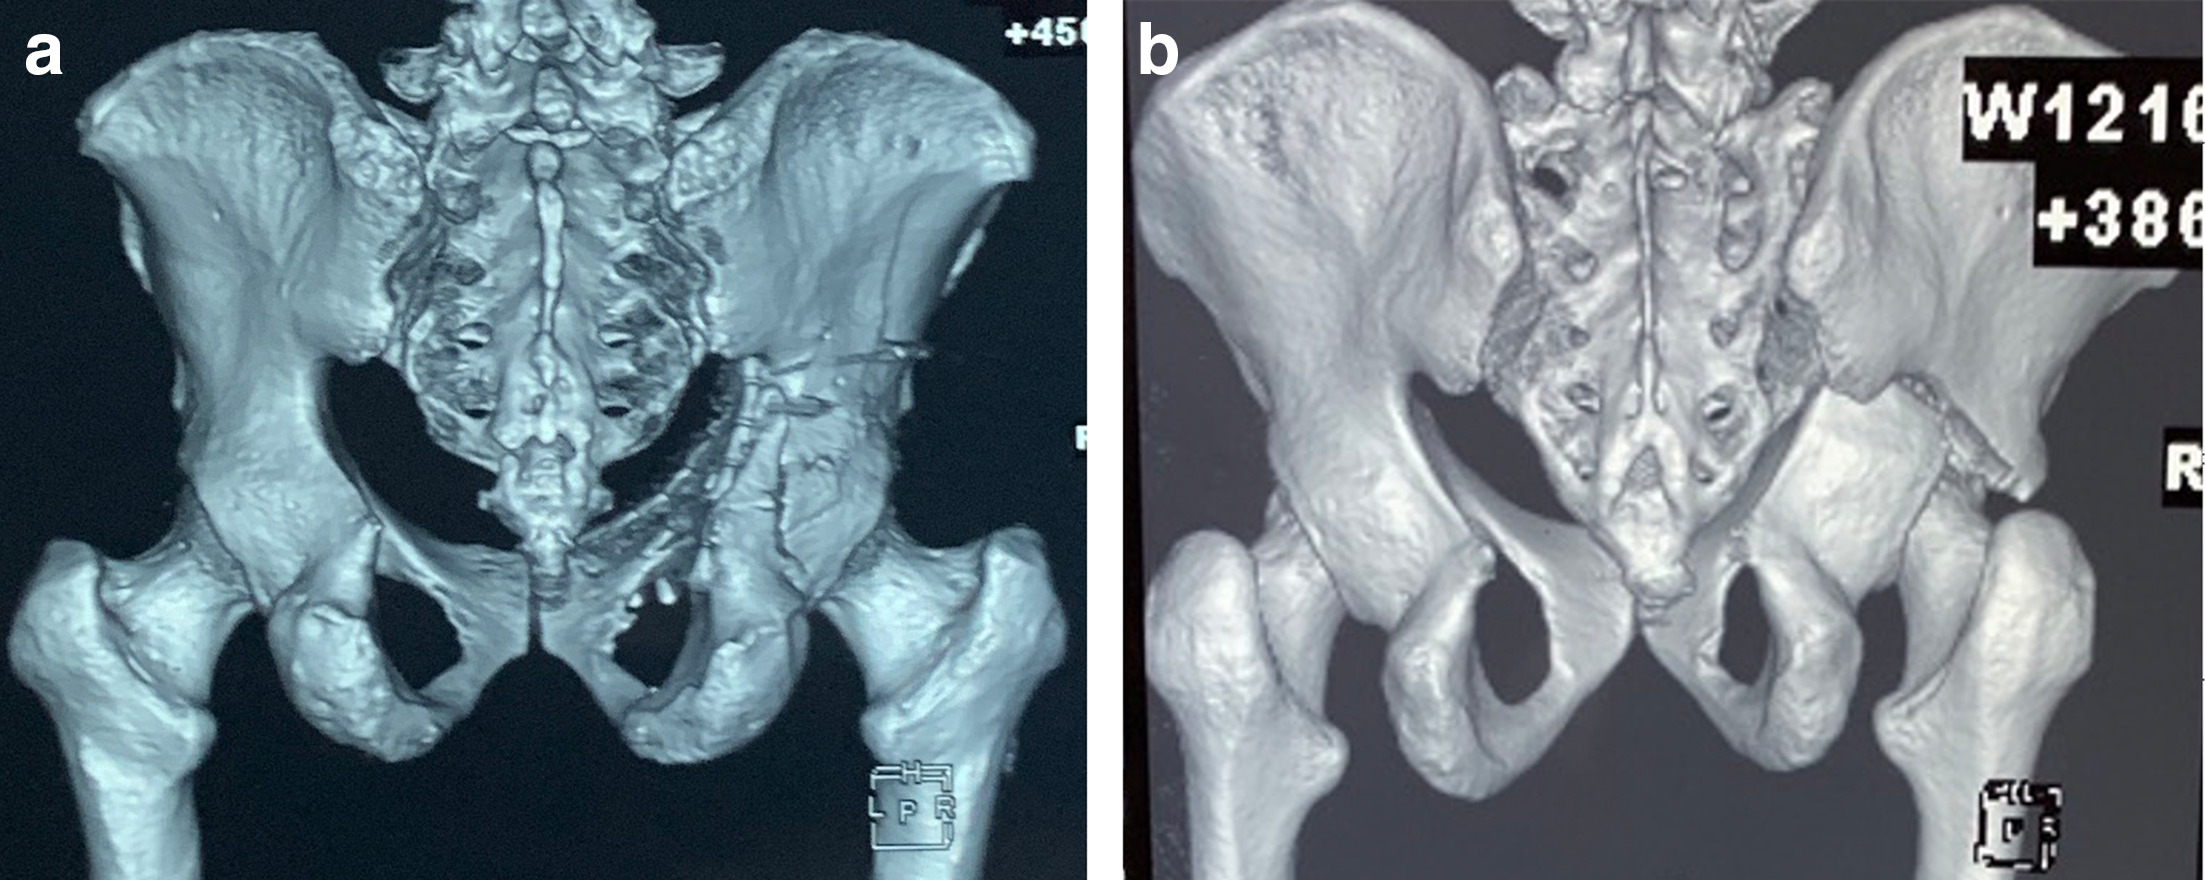 Fig. 2 
          a) 3D CT scan of a pelvis in a postoperative case of anterior column posterior hemitransverse acetabulum fracture showing oblique orientation of posterior column fracture line which was buttressed with reconstruction plate along the border of sciatic notch on the inner surface of posterior column, neutralizing medial force of head of femur, as well as preventing proximal migration of apex of distal fragment. b) 3D CT scan of pelvis in a case of transverse acetabulum fracture showing horizontal orientation of posterior column fracture line, which can be fixed with reconstruction plate along the border of sciatic notch on the inner surface of posterior column; although this neutralizes the medial force of head of femur, interfragmentary compression should be applied with clamps before fixation, since compression is not possible with this technique as it would be possible with antegrade posterior column screw fixation.
        